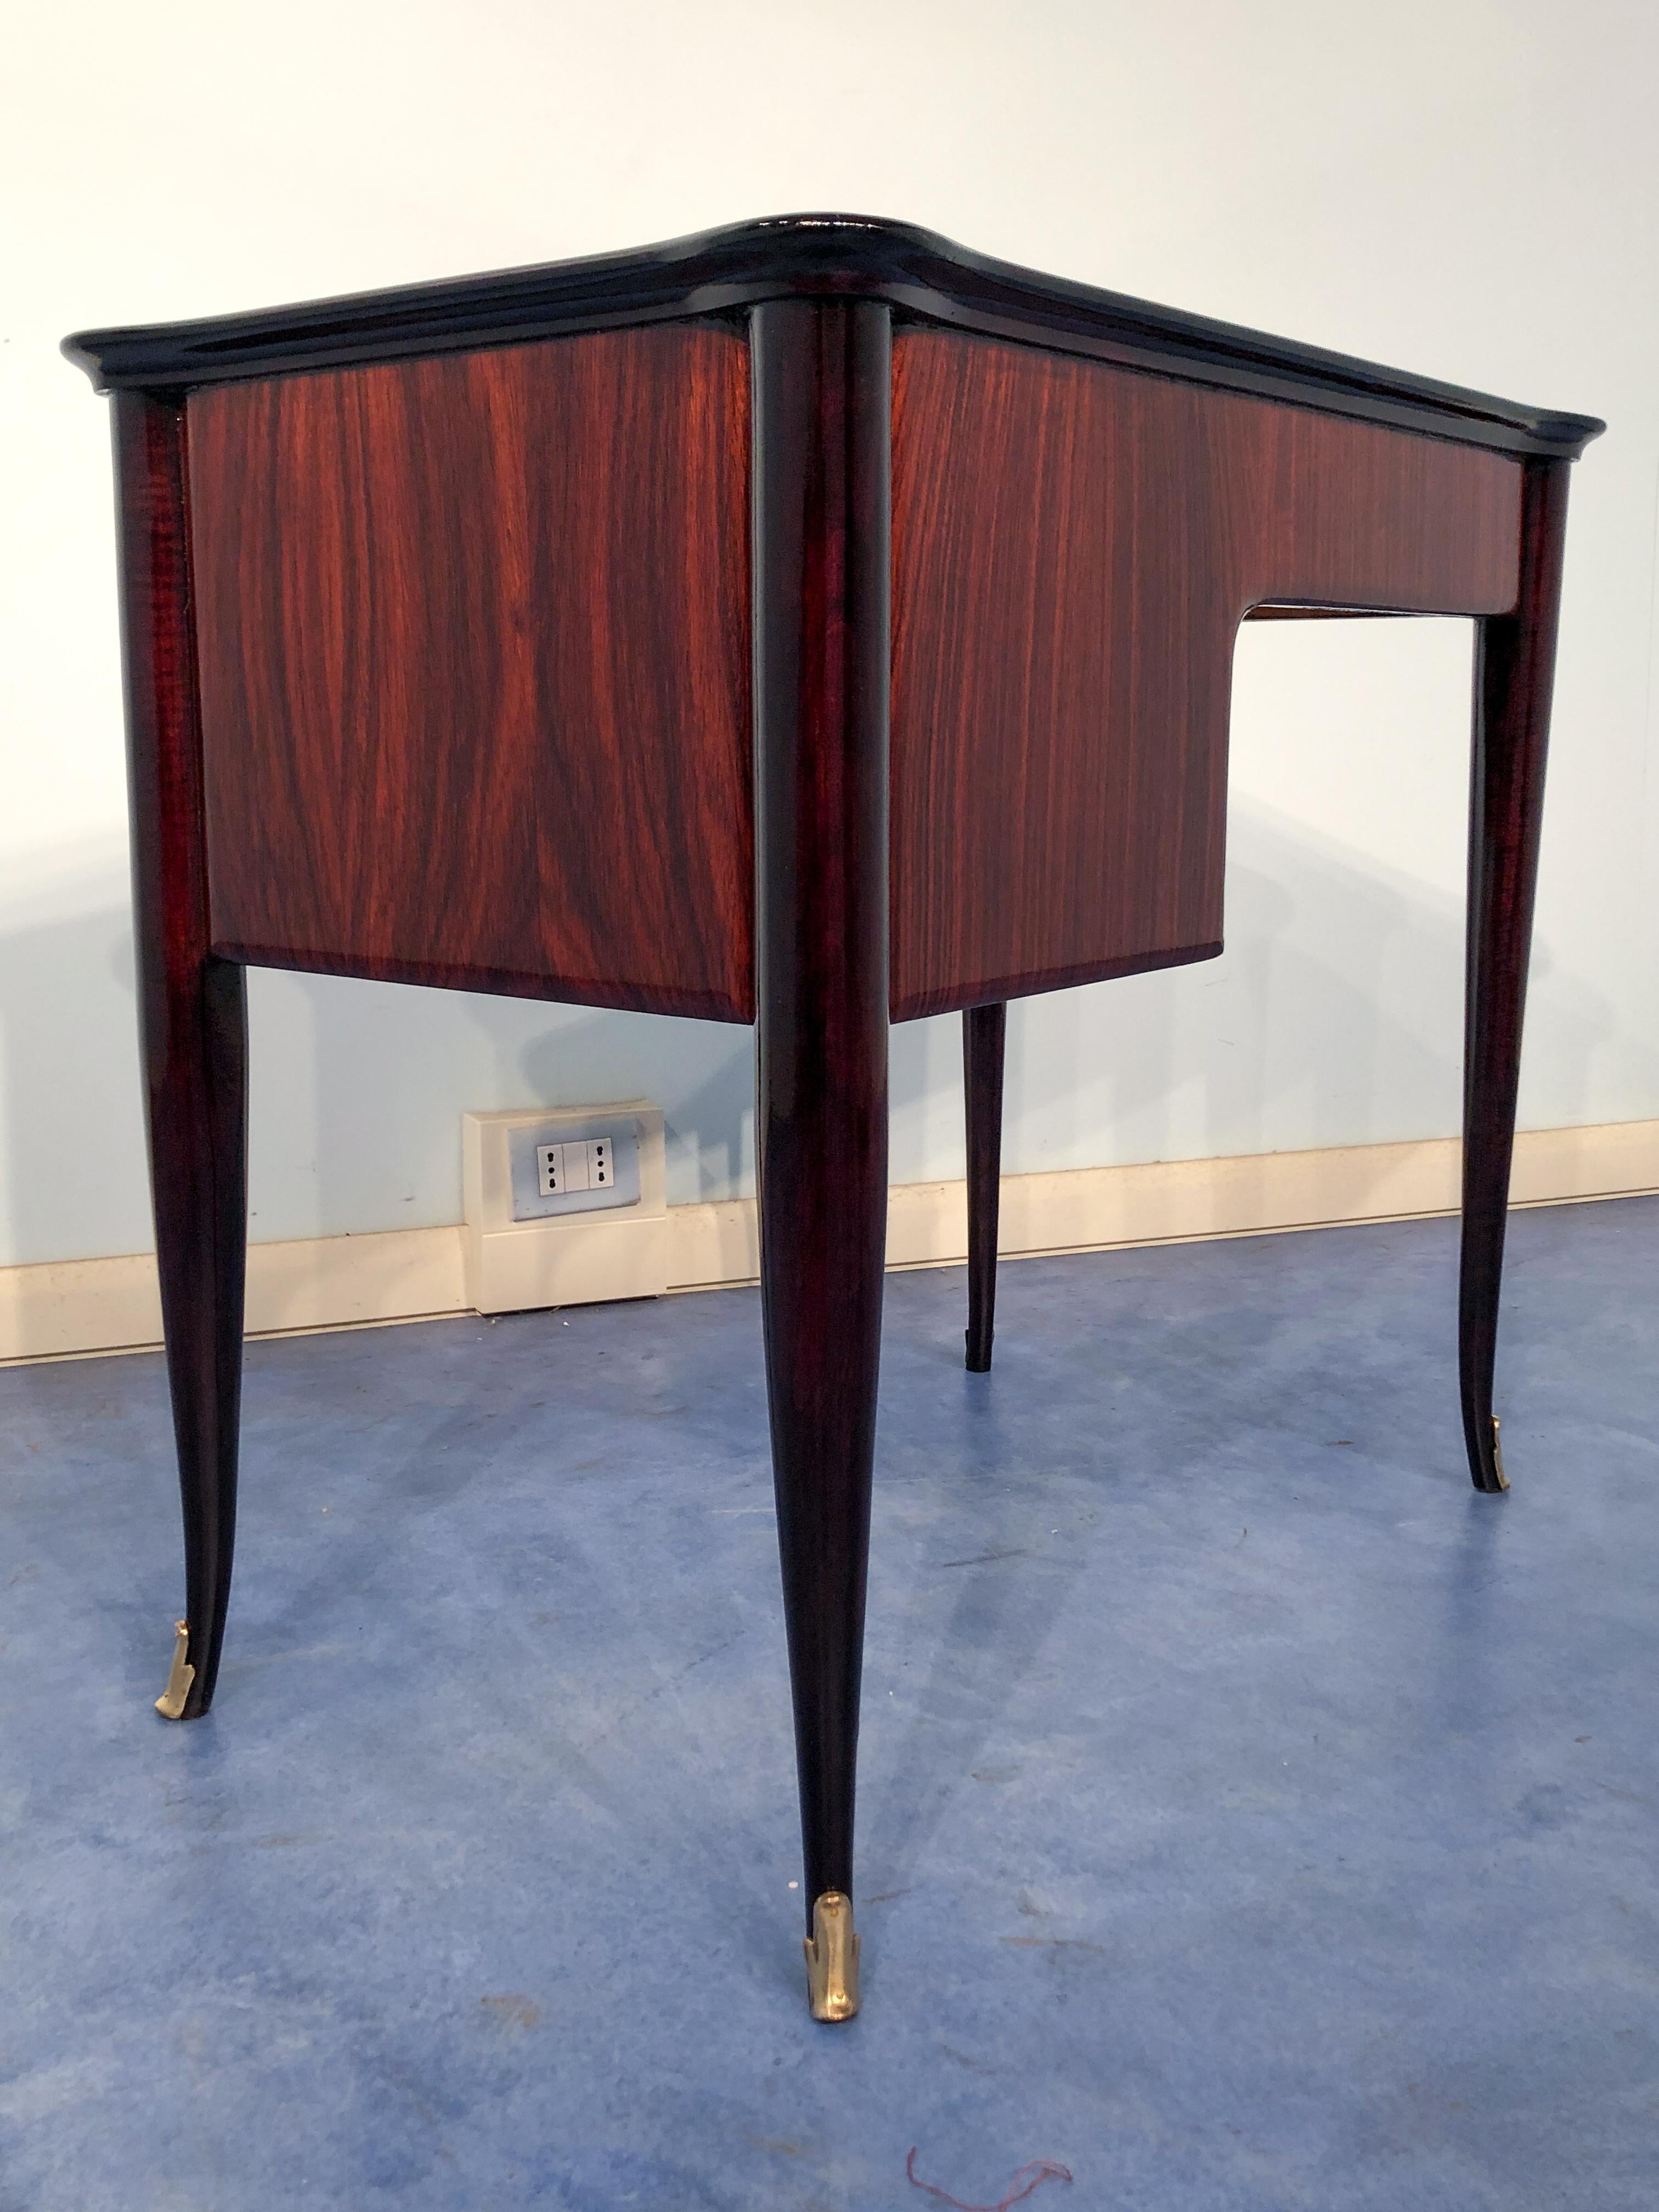 Italian Mid-Century Modern Small Desk and Chair Attributed to Paolo Buffa, 1950s For Sale 4